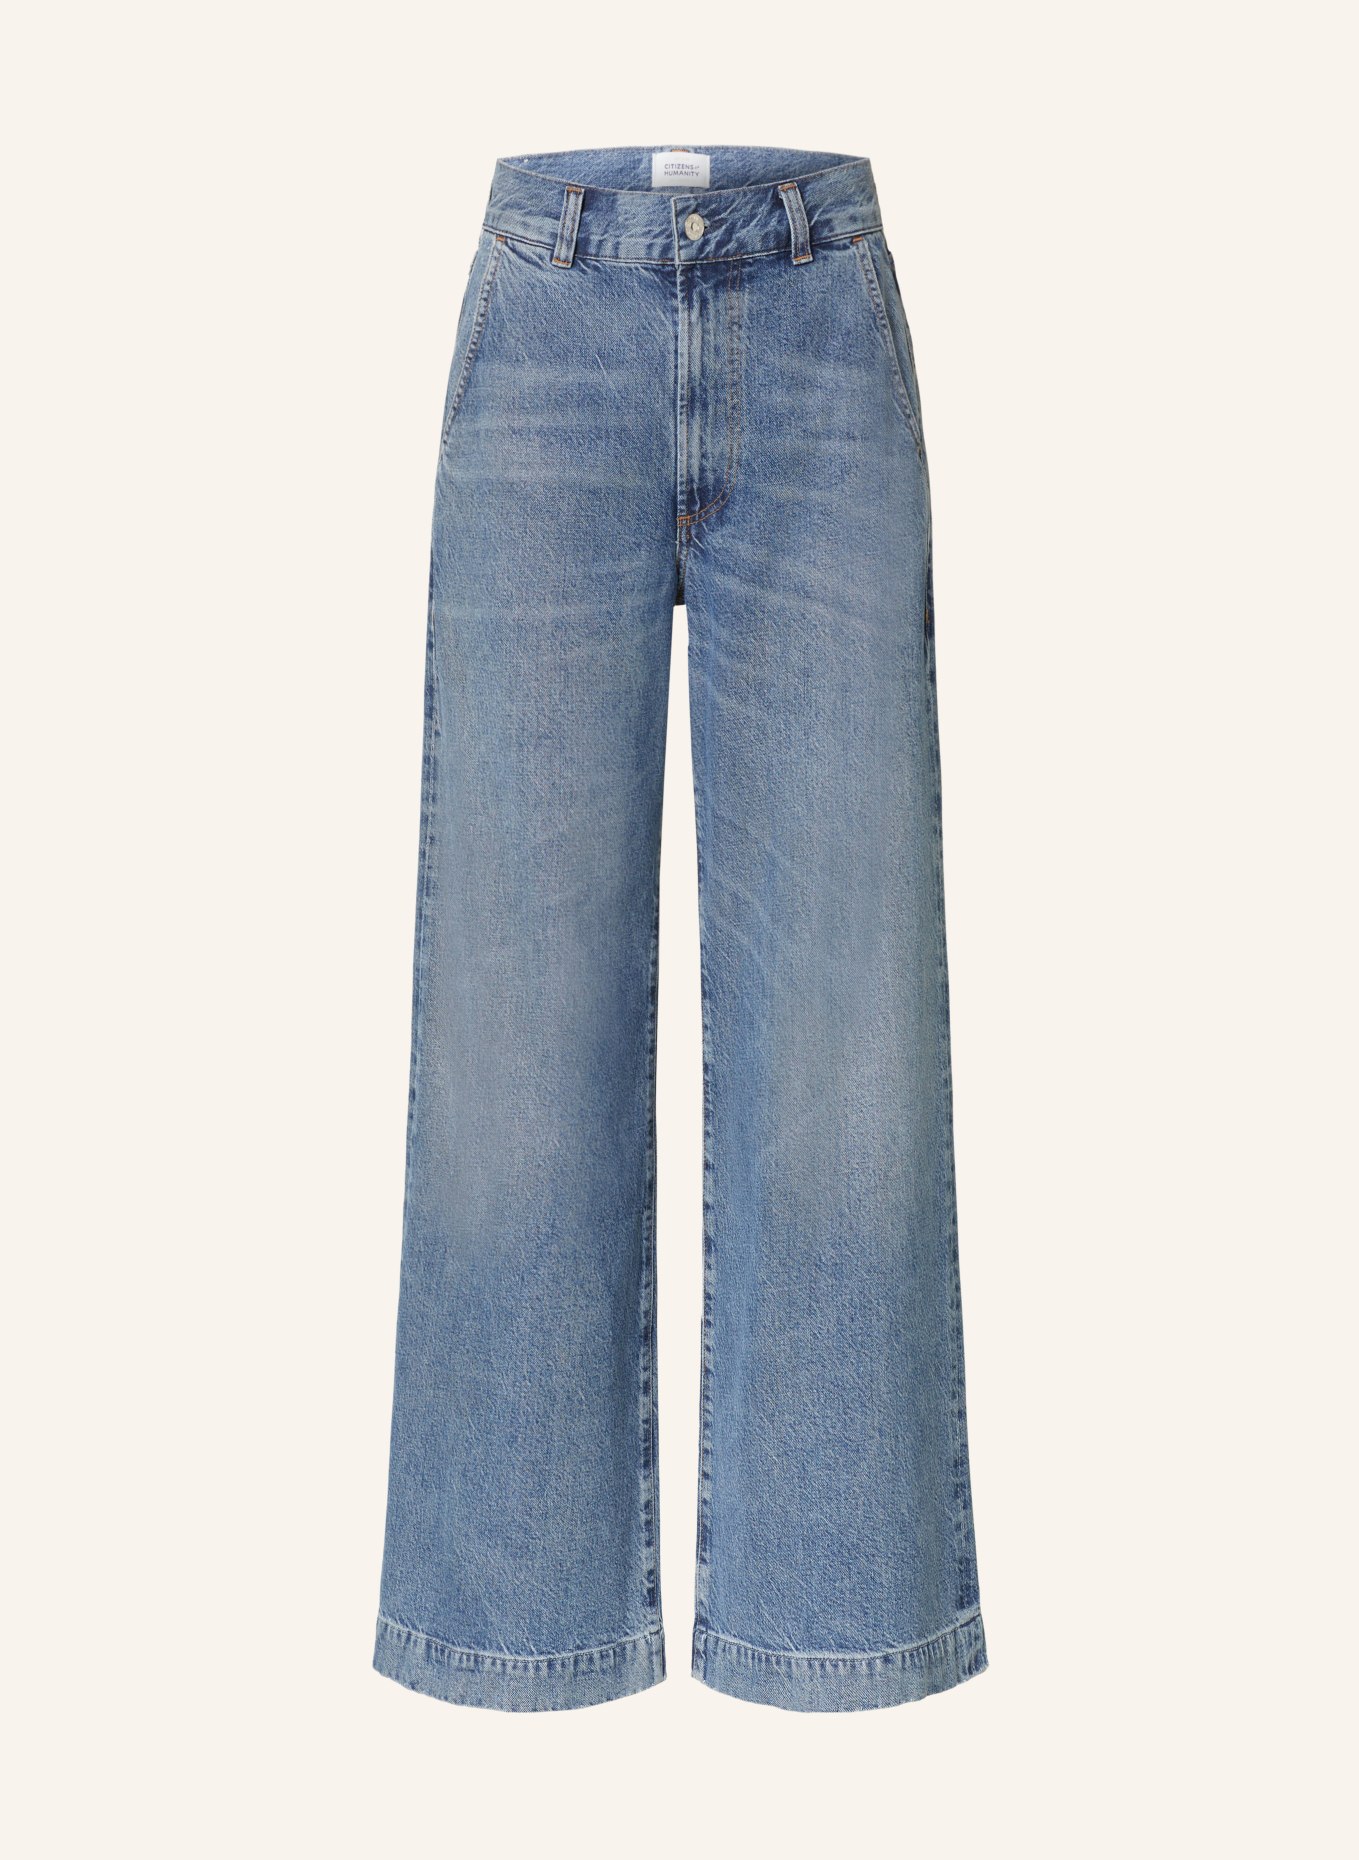 CITIZENS of HUMANITY Straight Jeans BEVERLY, Farbe: pirouette indigo light vintag (Bild 1)